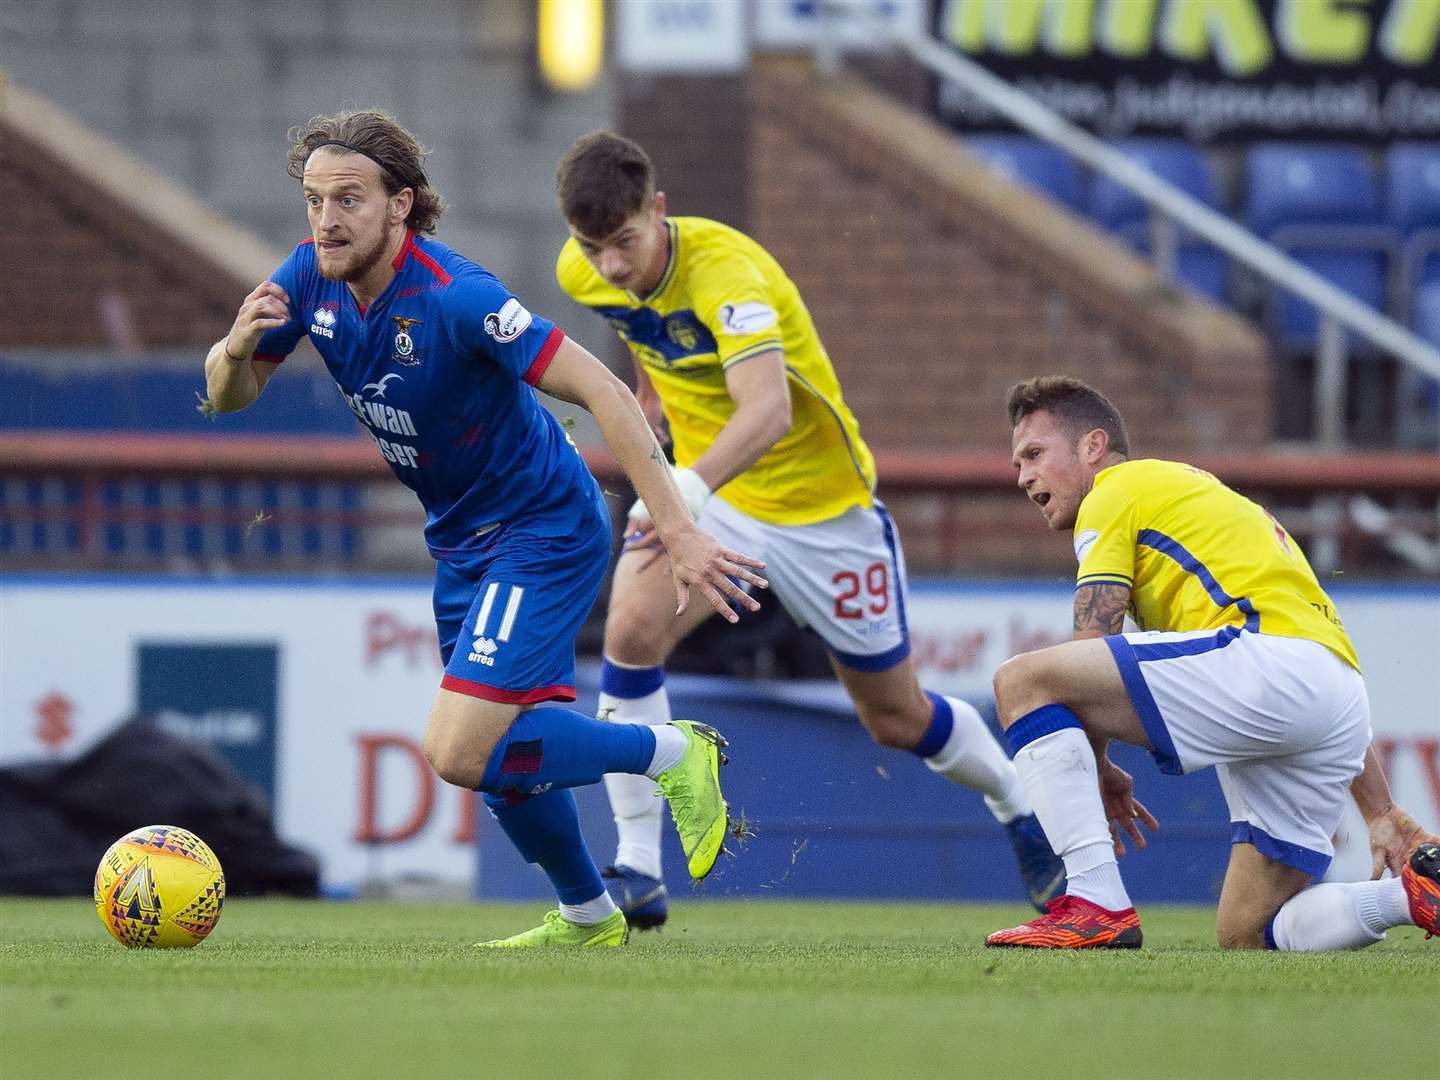 Picture - Ken Macpherson, Inverness. Inverness CT(5) v Morton(0). 30.08.19. ICT's Tom Walsh gets away from Morton’s Luca Colville and Chris Millar.